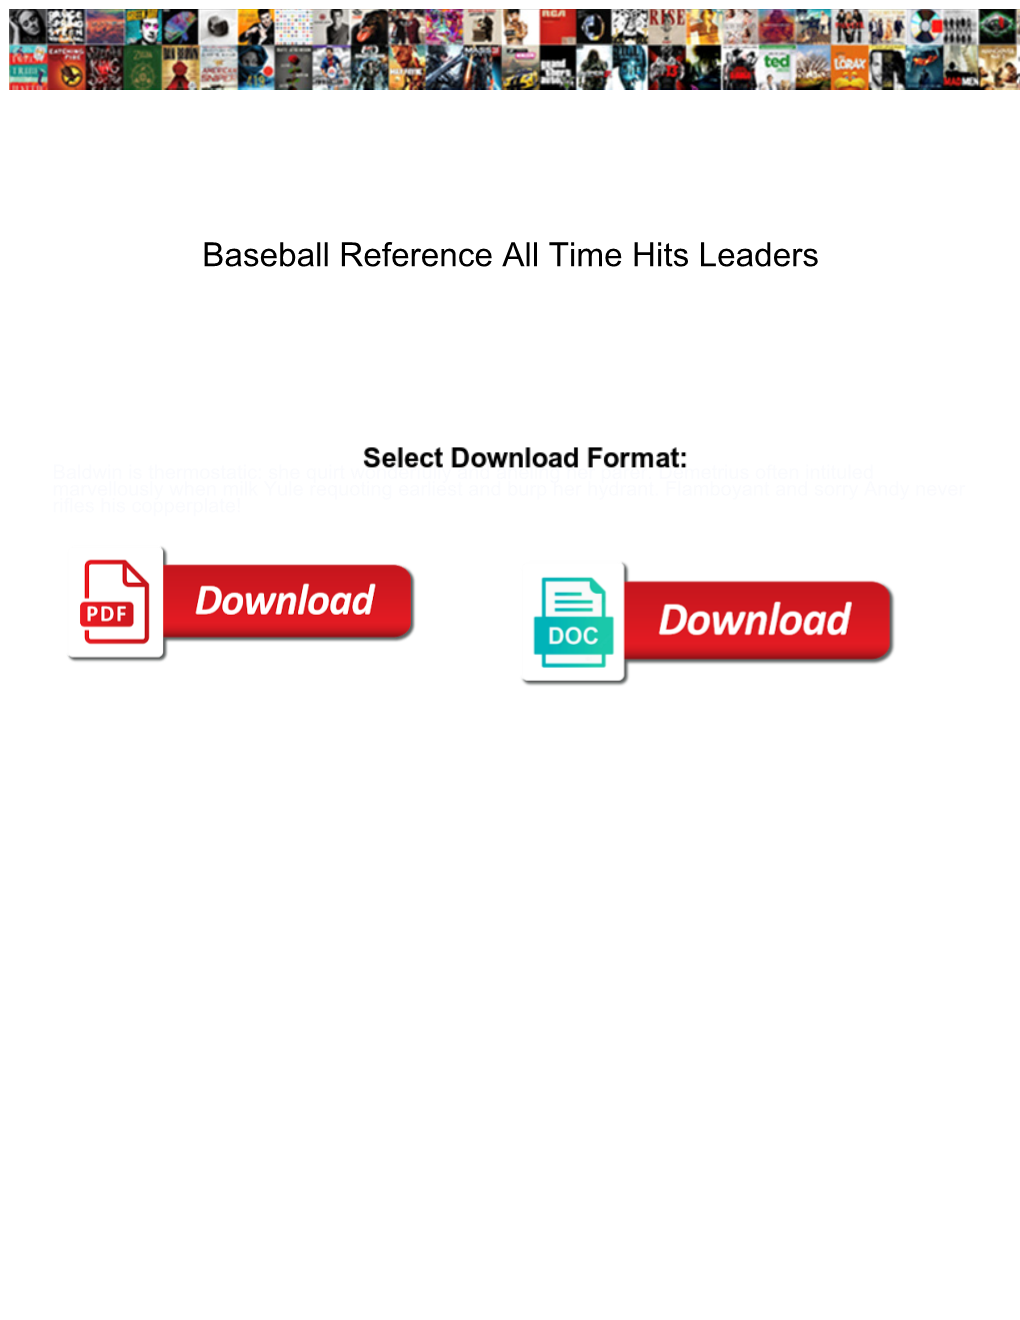 Baseball Reference All Time Hits Leaders